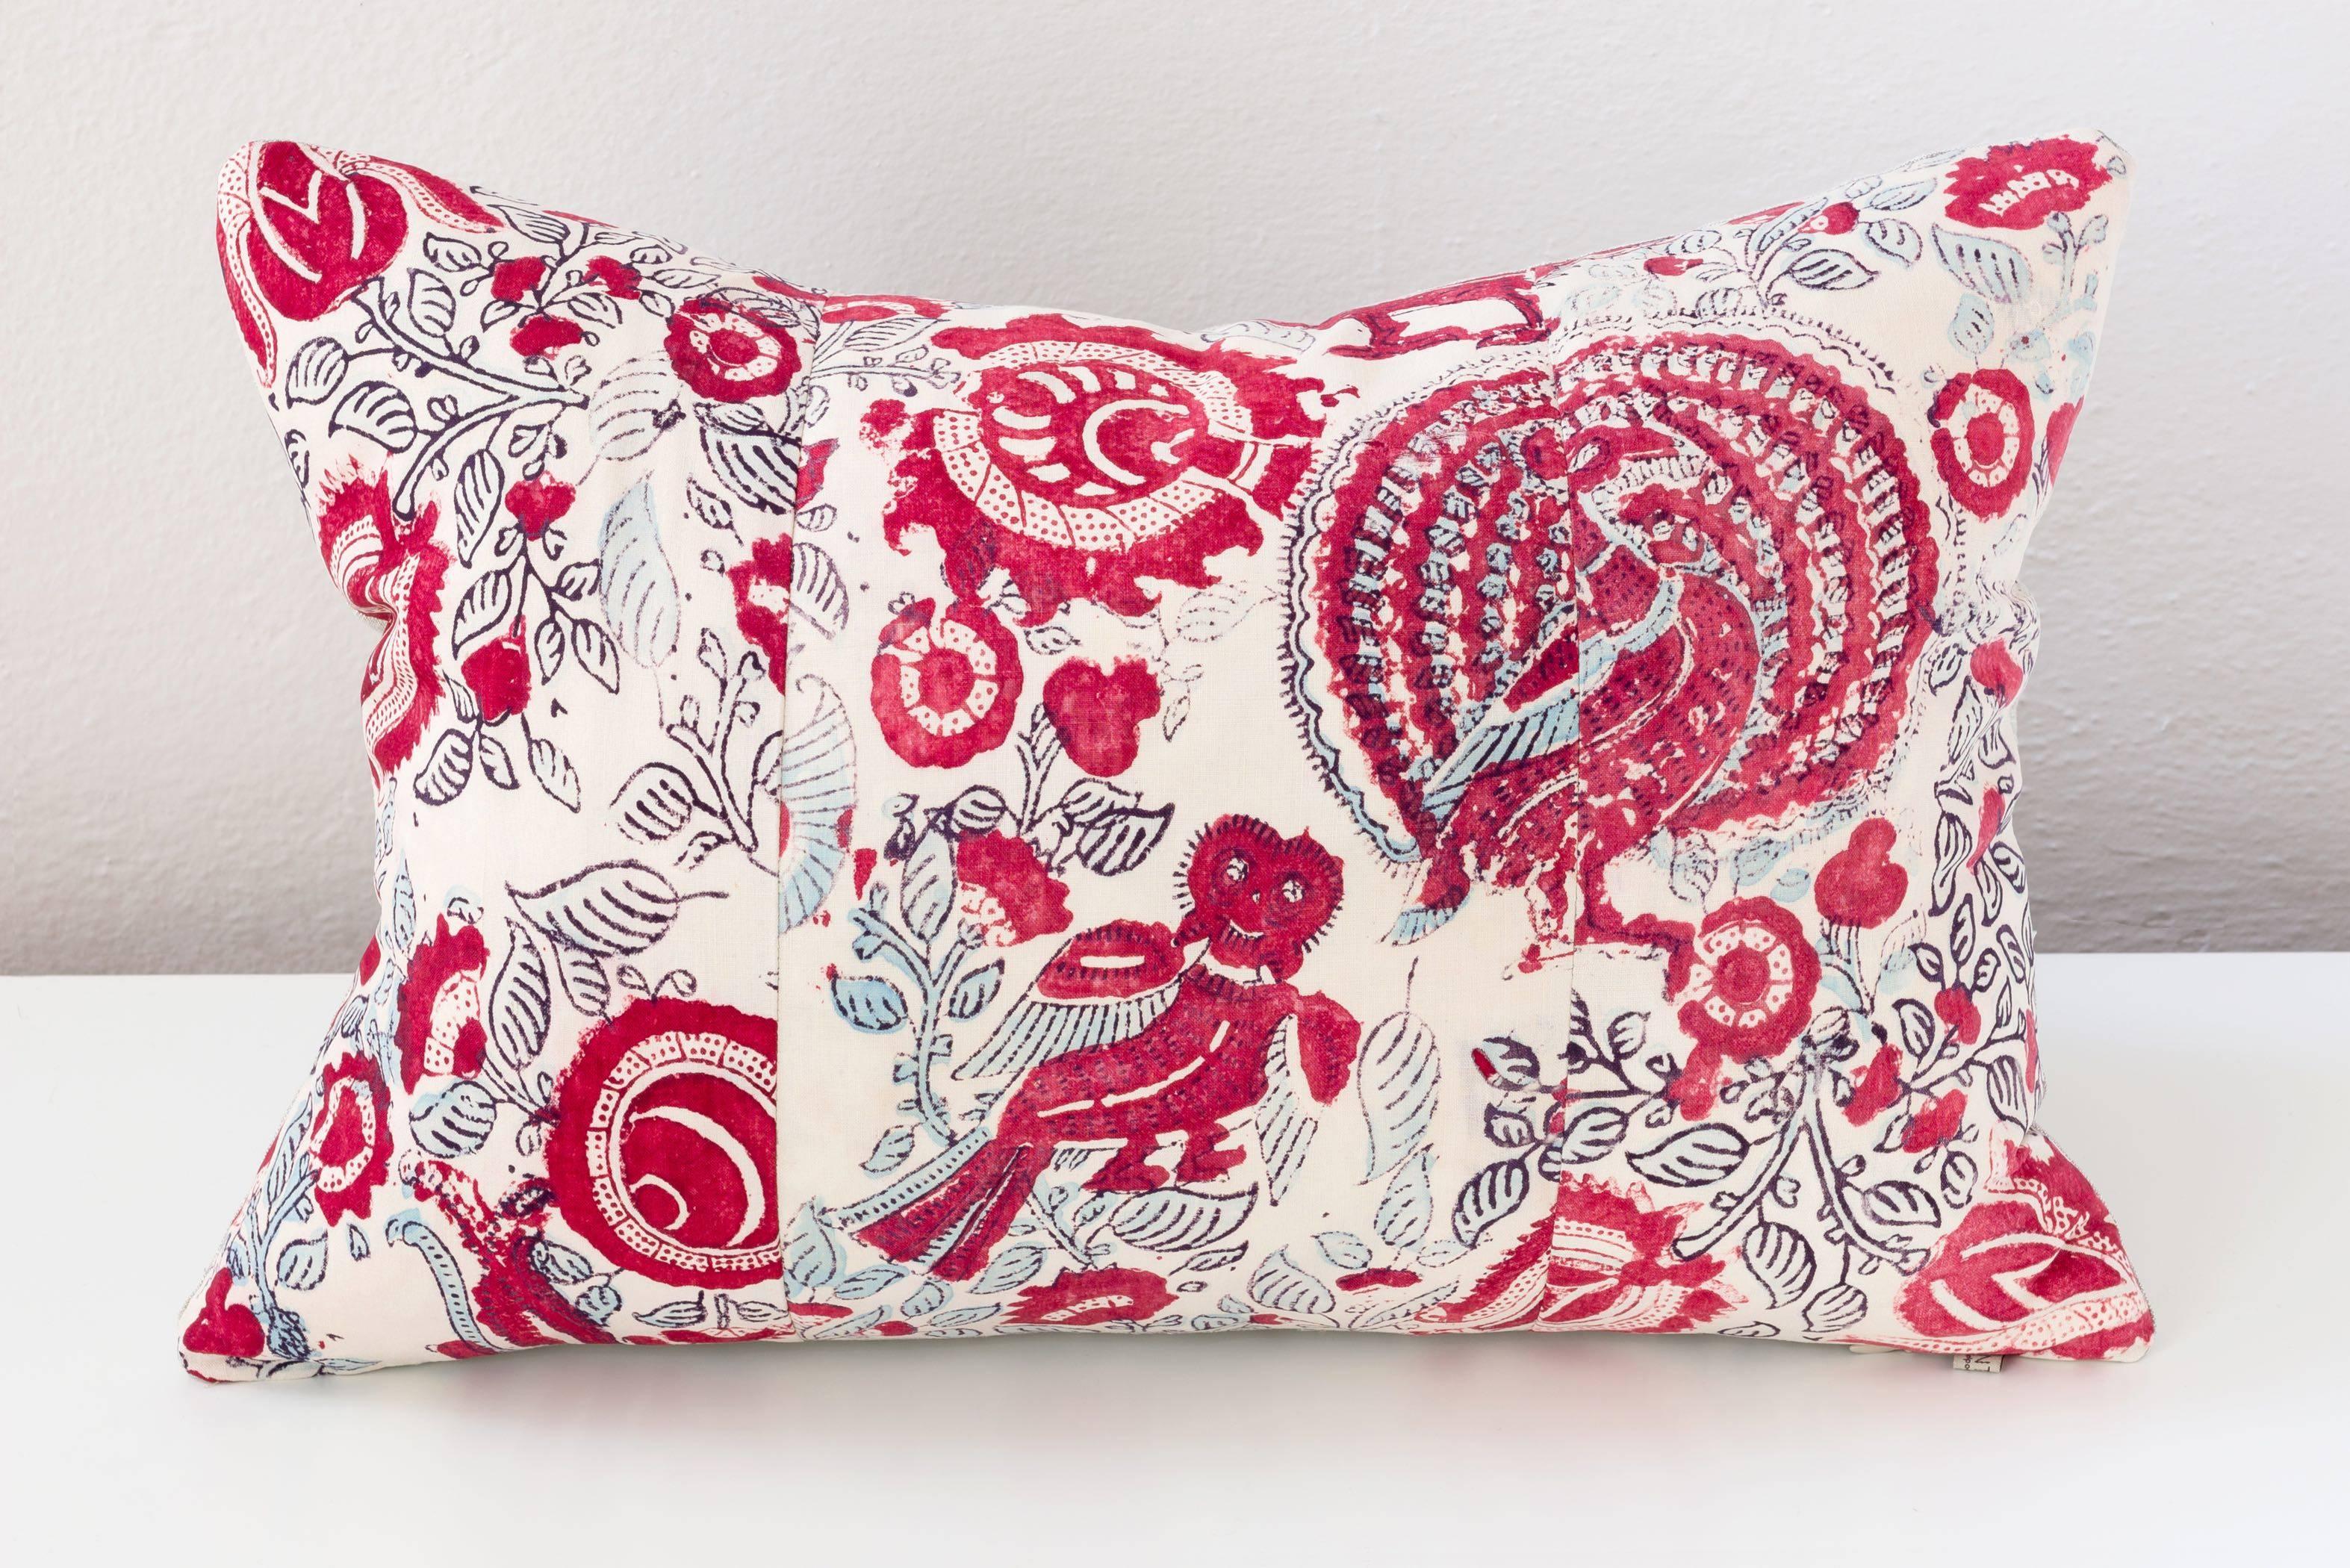 Anglo-Indian Early 20th Century Indian Block Print Pillow- Red and Light Blue